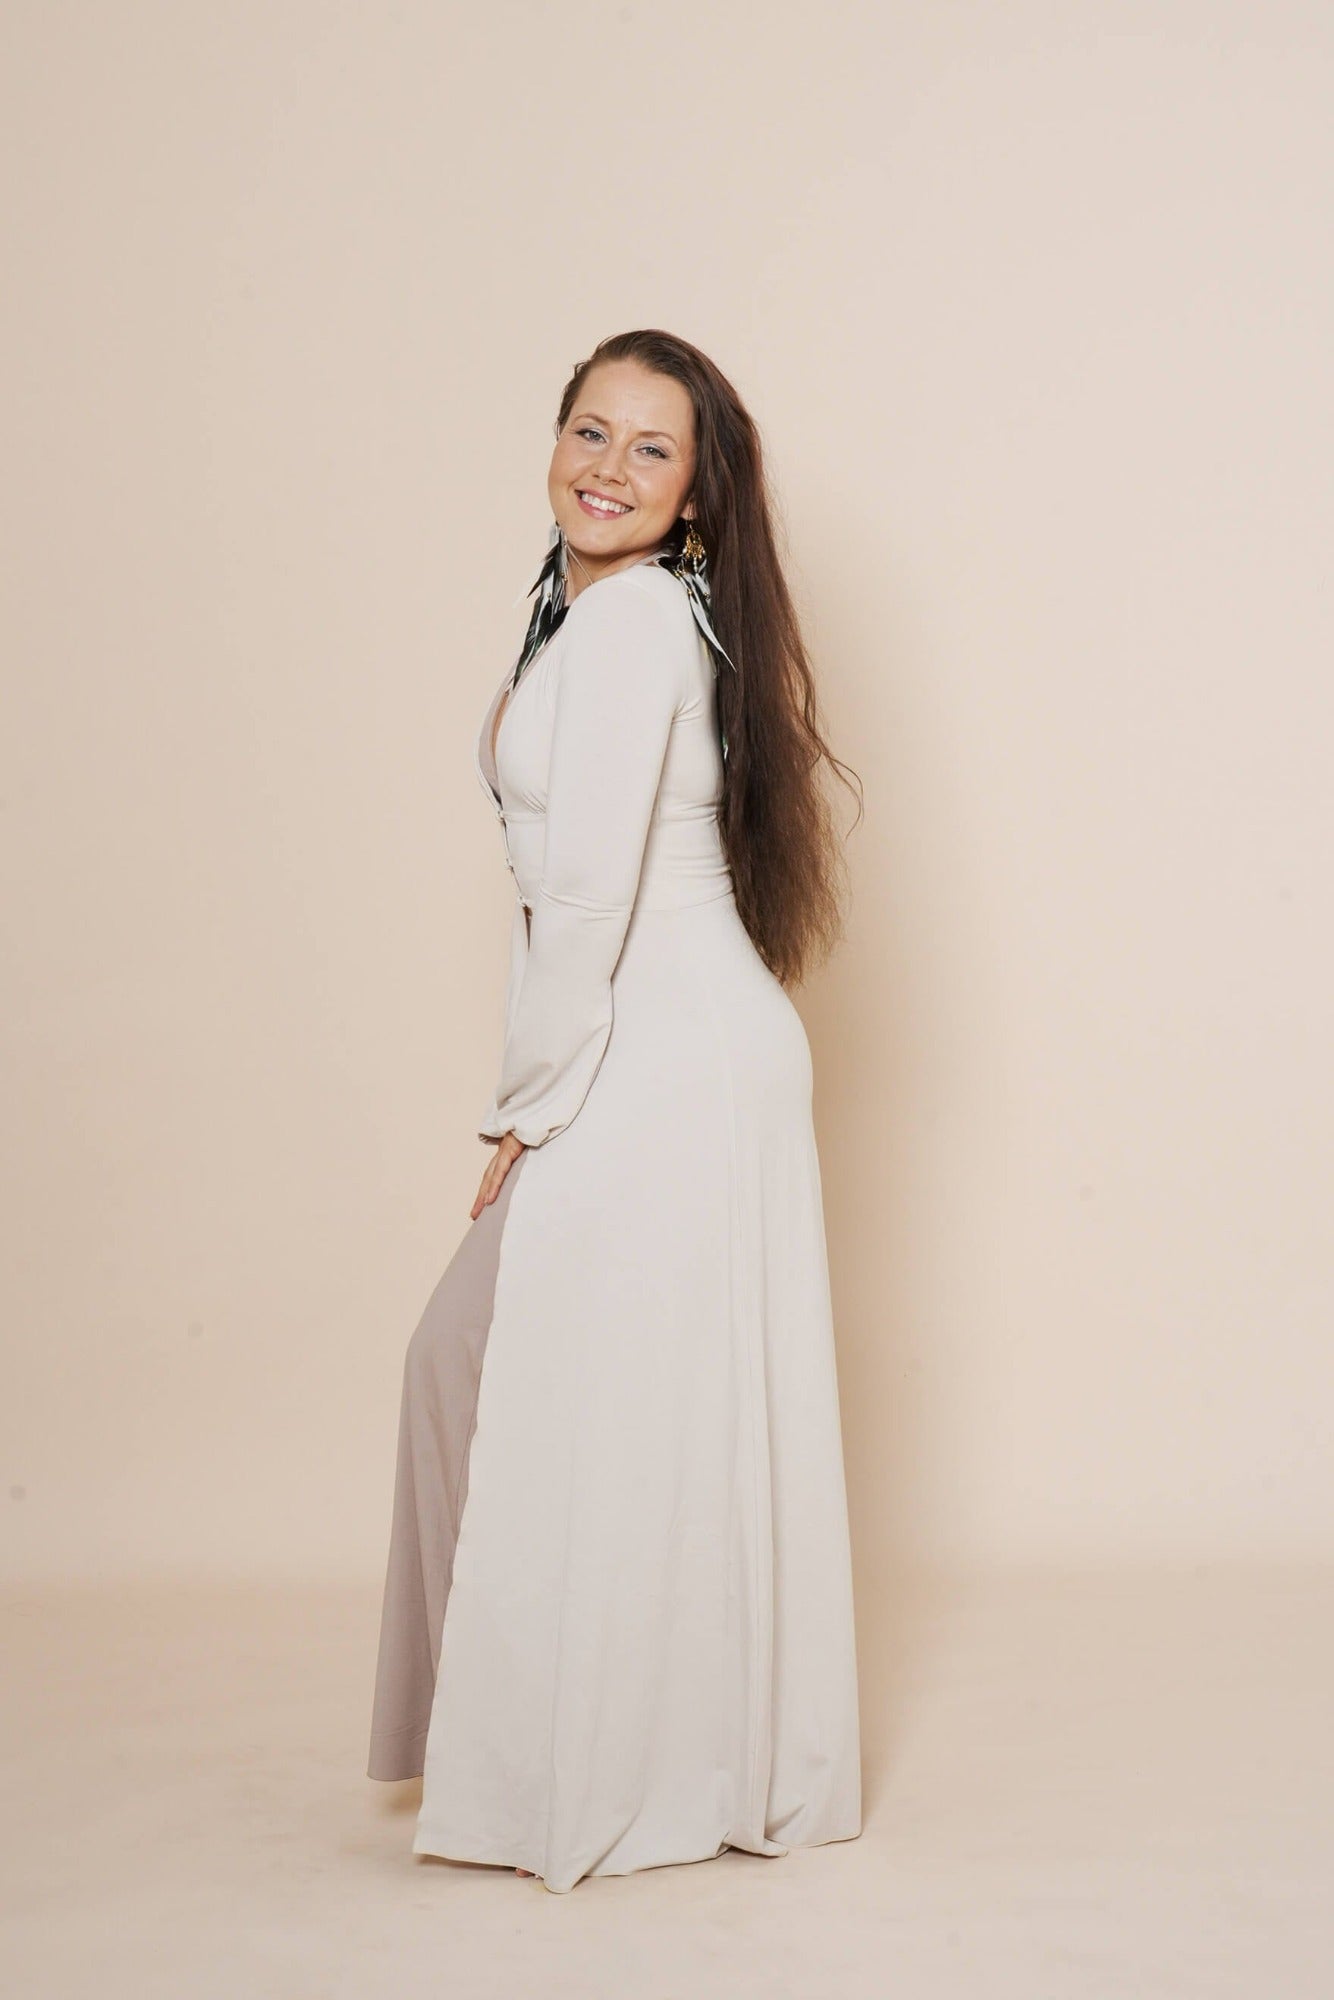 Long puffy sleeve vest in color winter white, combined with flair pants and halter top in color taupe.